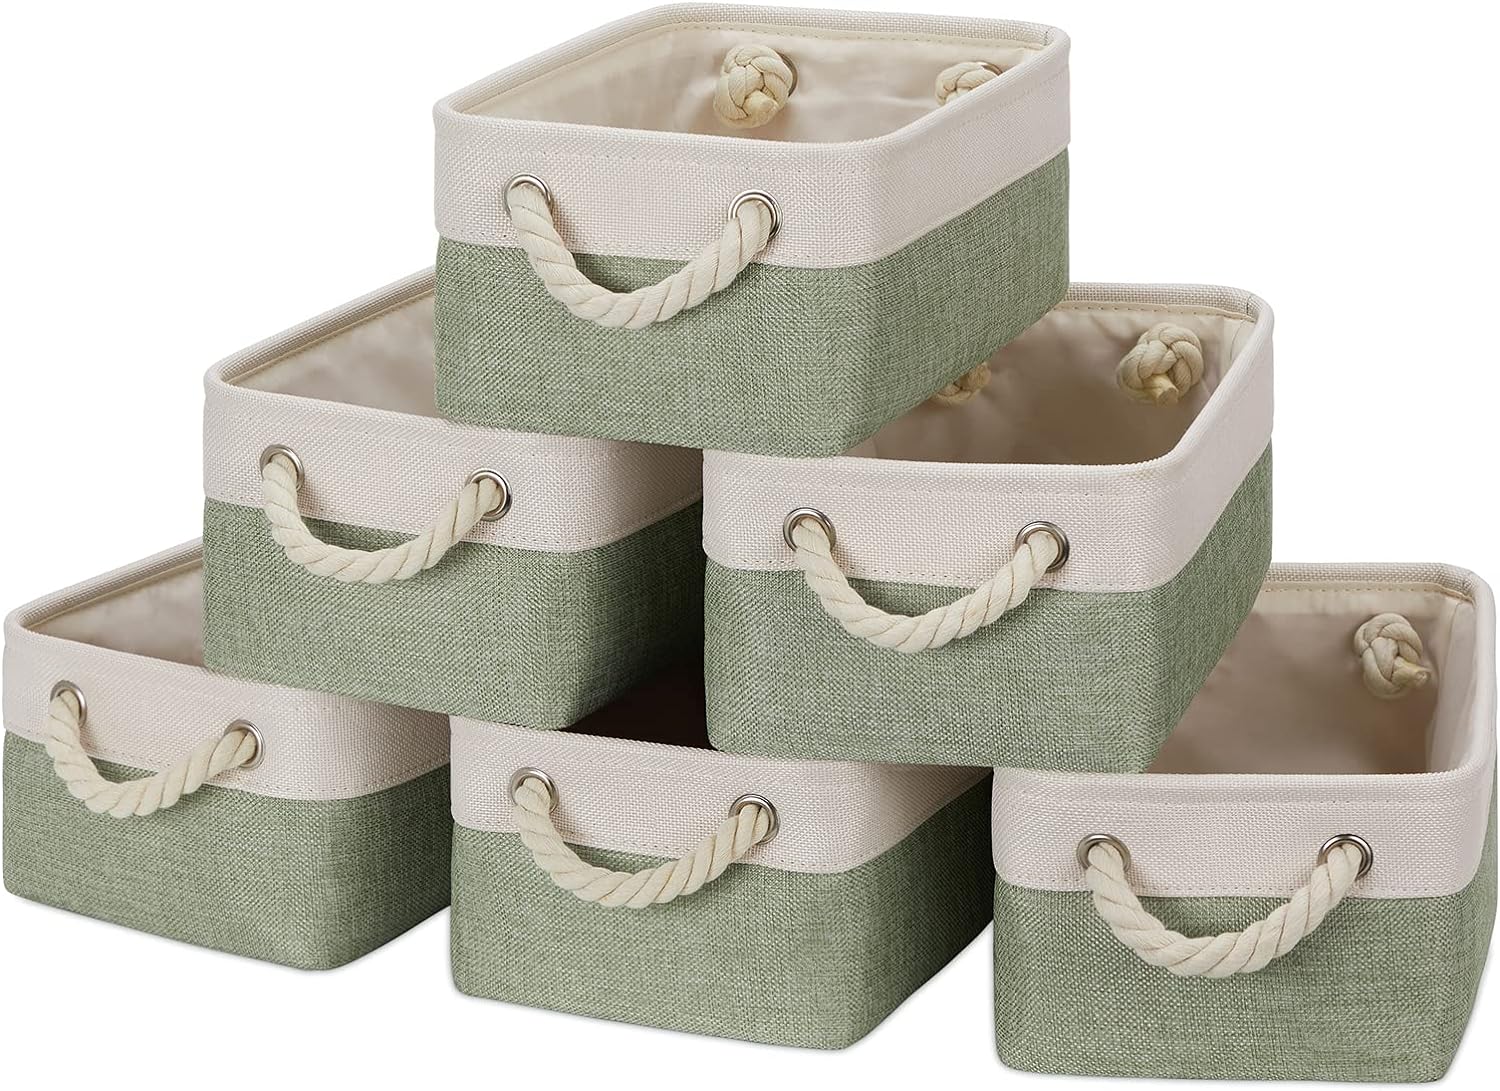 Temary Small Storage Baskets Small Fabric Bins for Closet, 6 Pack Decorative Storage Boxes with Rope Handles for Organizing Toys, Clothes, Canvas Storage Basket(White&Green,11.8L x 7.9W x 5.3H inches)